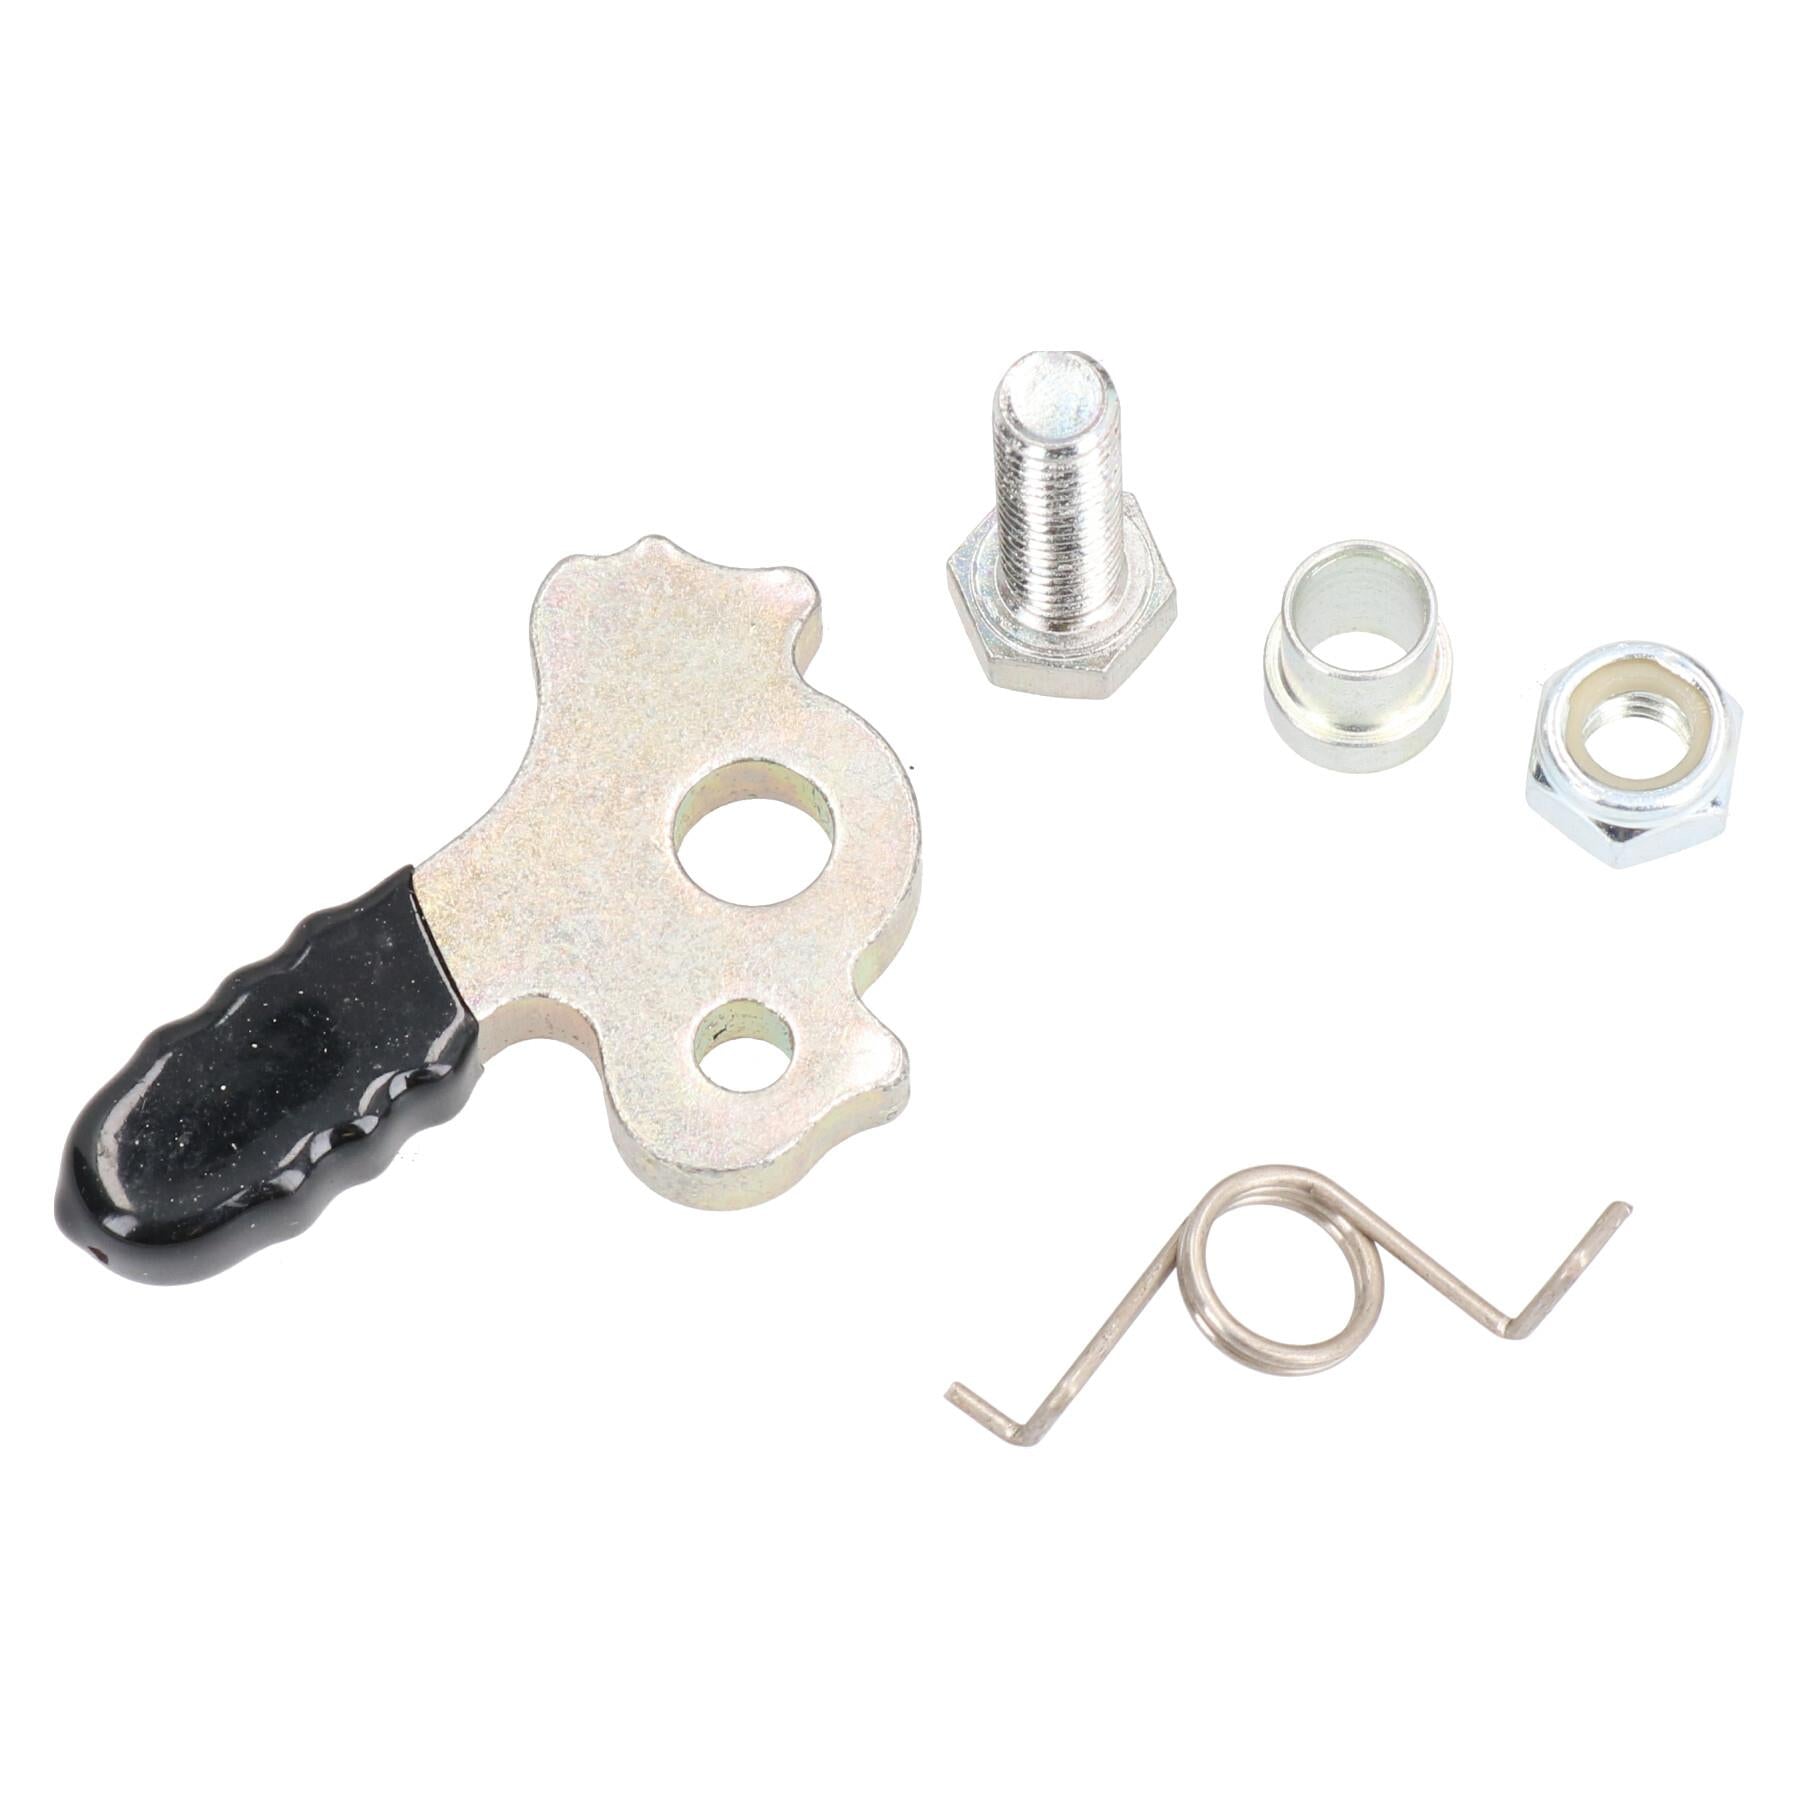 Replacement Spring & Ratchet Pawl Kit for Trailer Boat Strap Cable Winch Repair